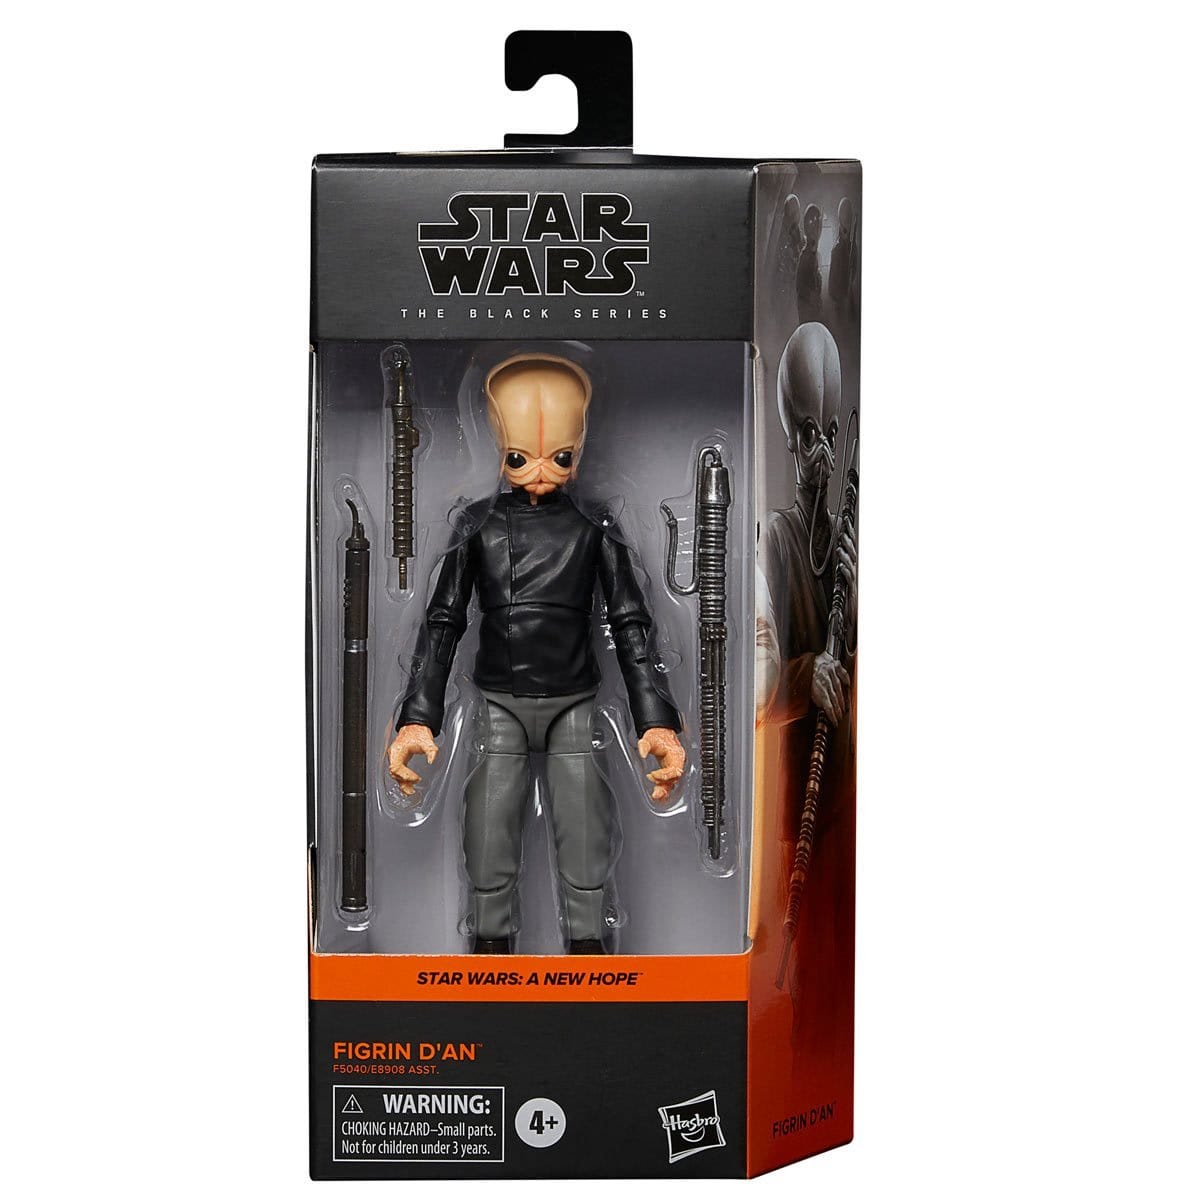 Star Wars The Black Series Figrin D'an 6" Action Figure - Pop-O-Loco - Hasbro